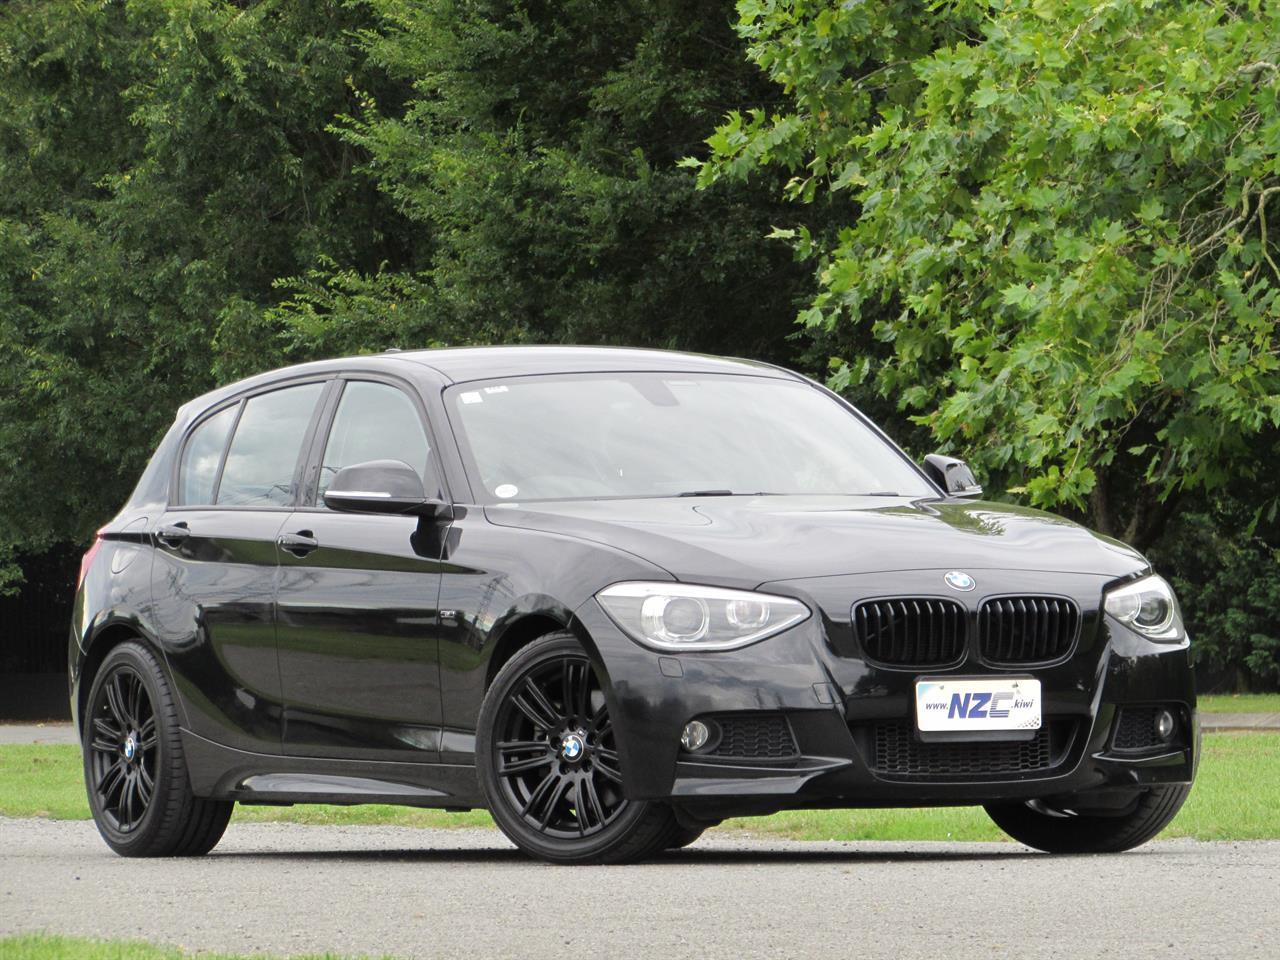 NZC best hot price for 2014 BMW 116i in Christchurch